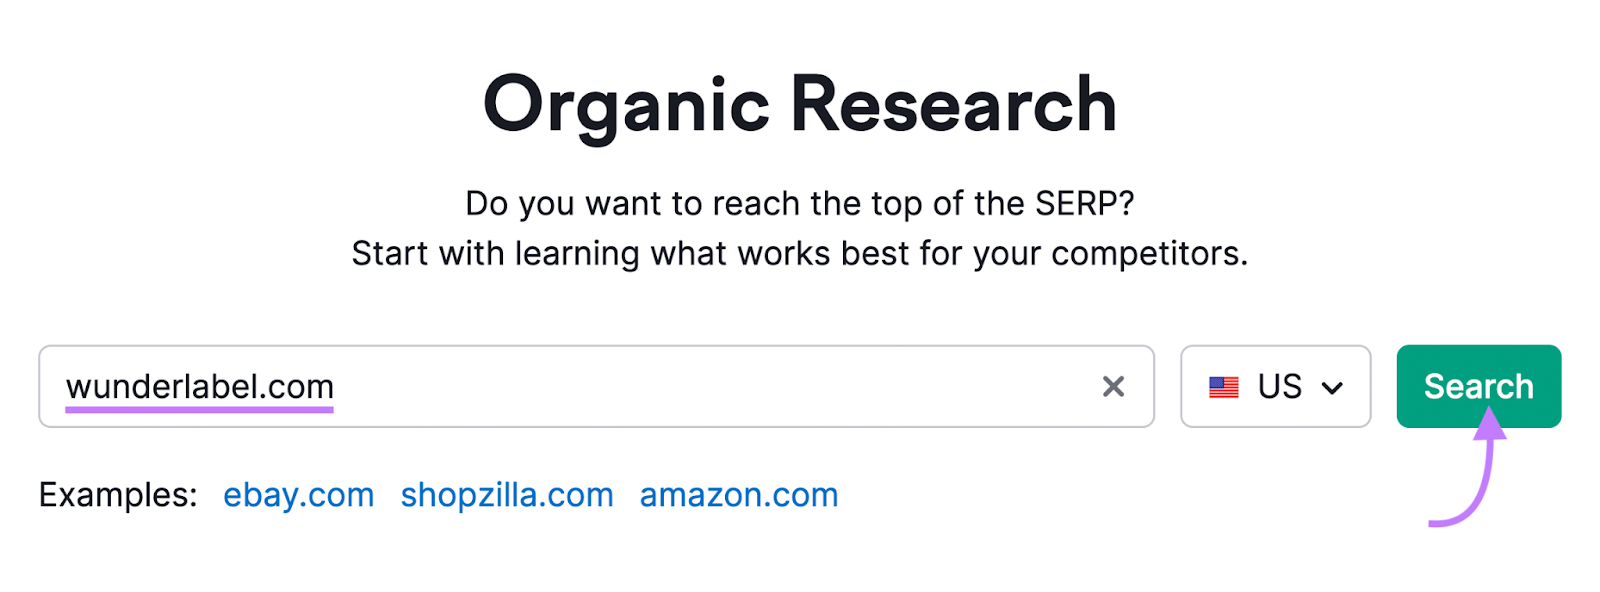 "wunderlabel.com" entered into Organic Research search bar